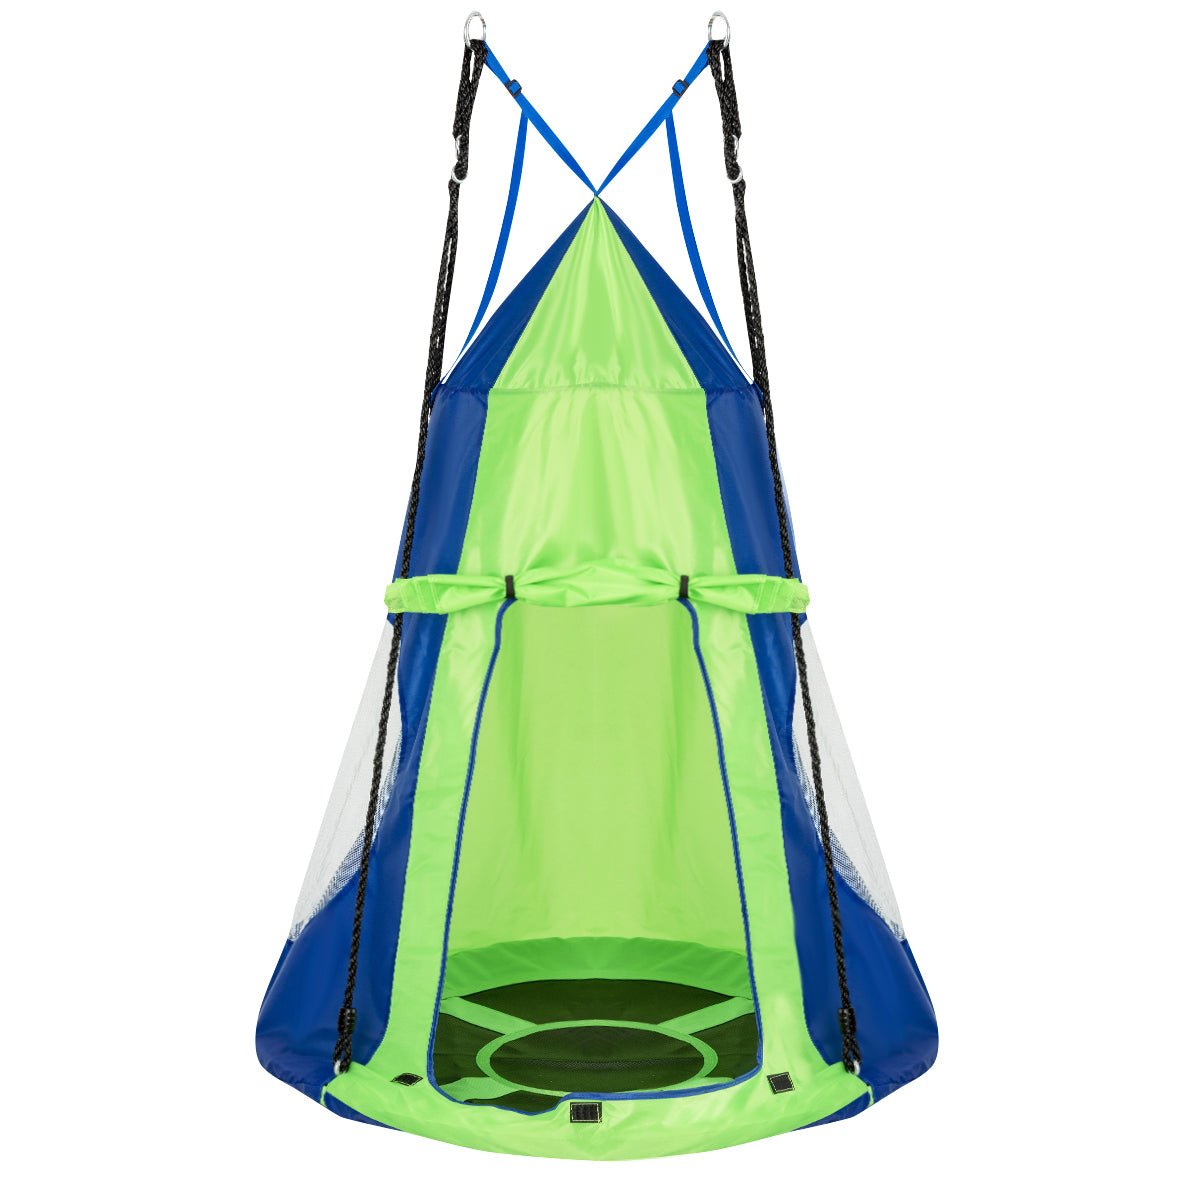 A World of Imagination in Our Tree Tent Swing Set